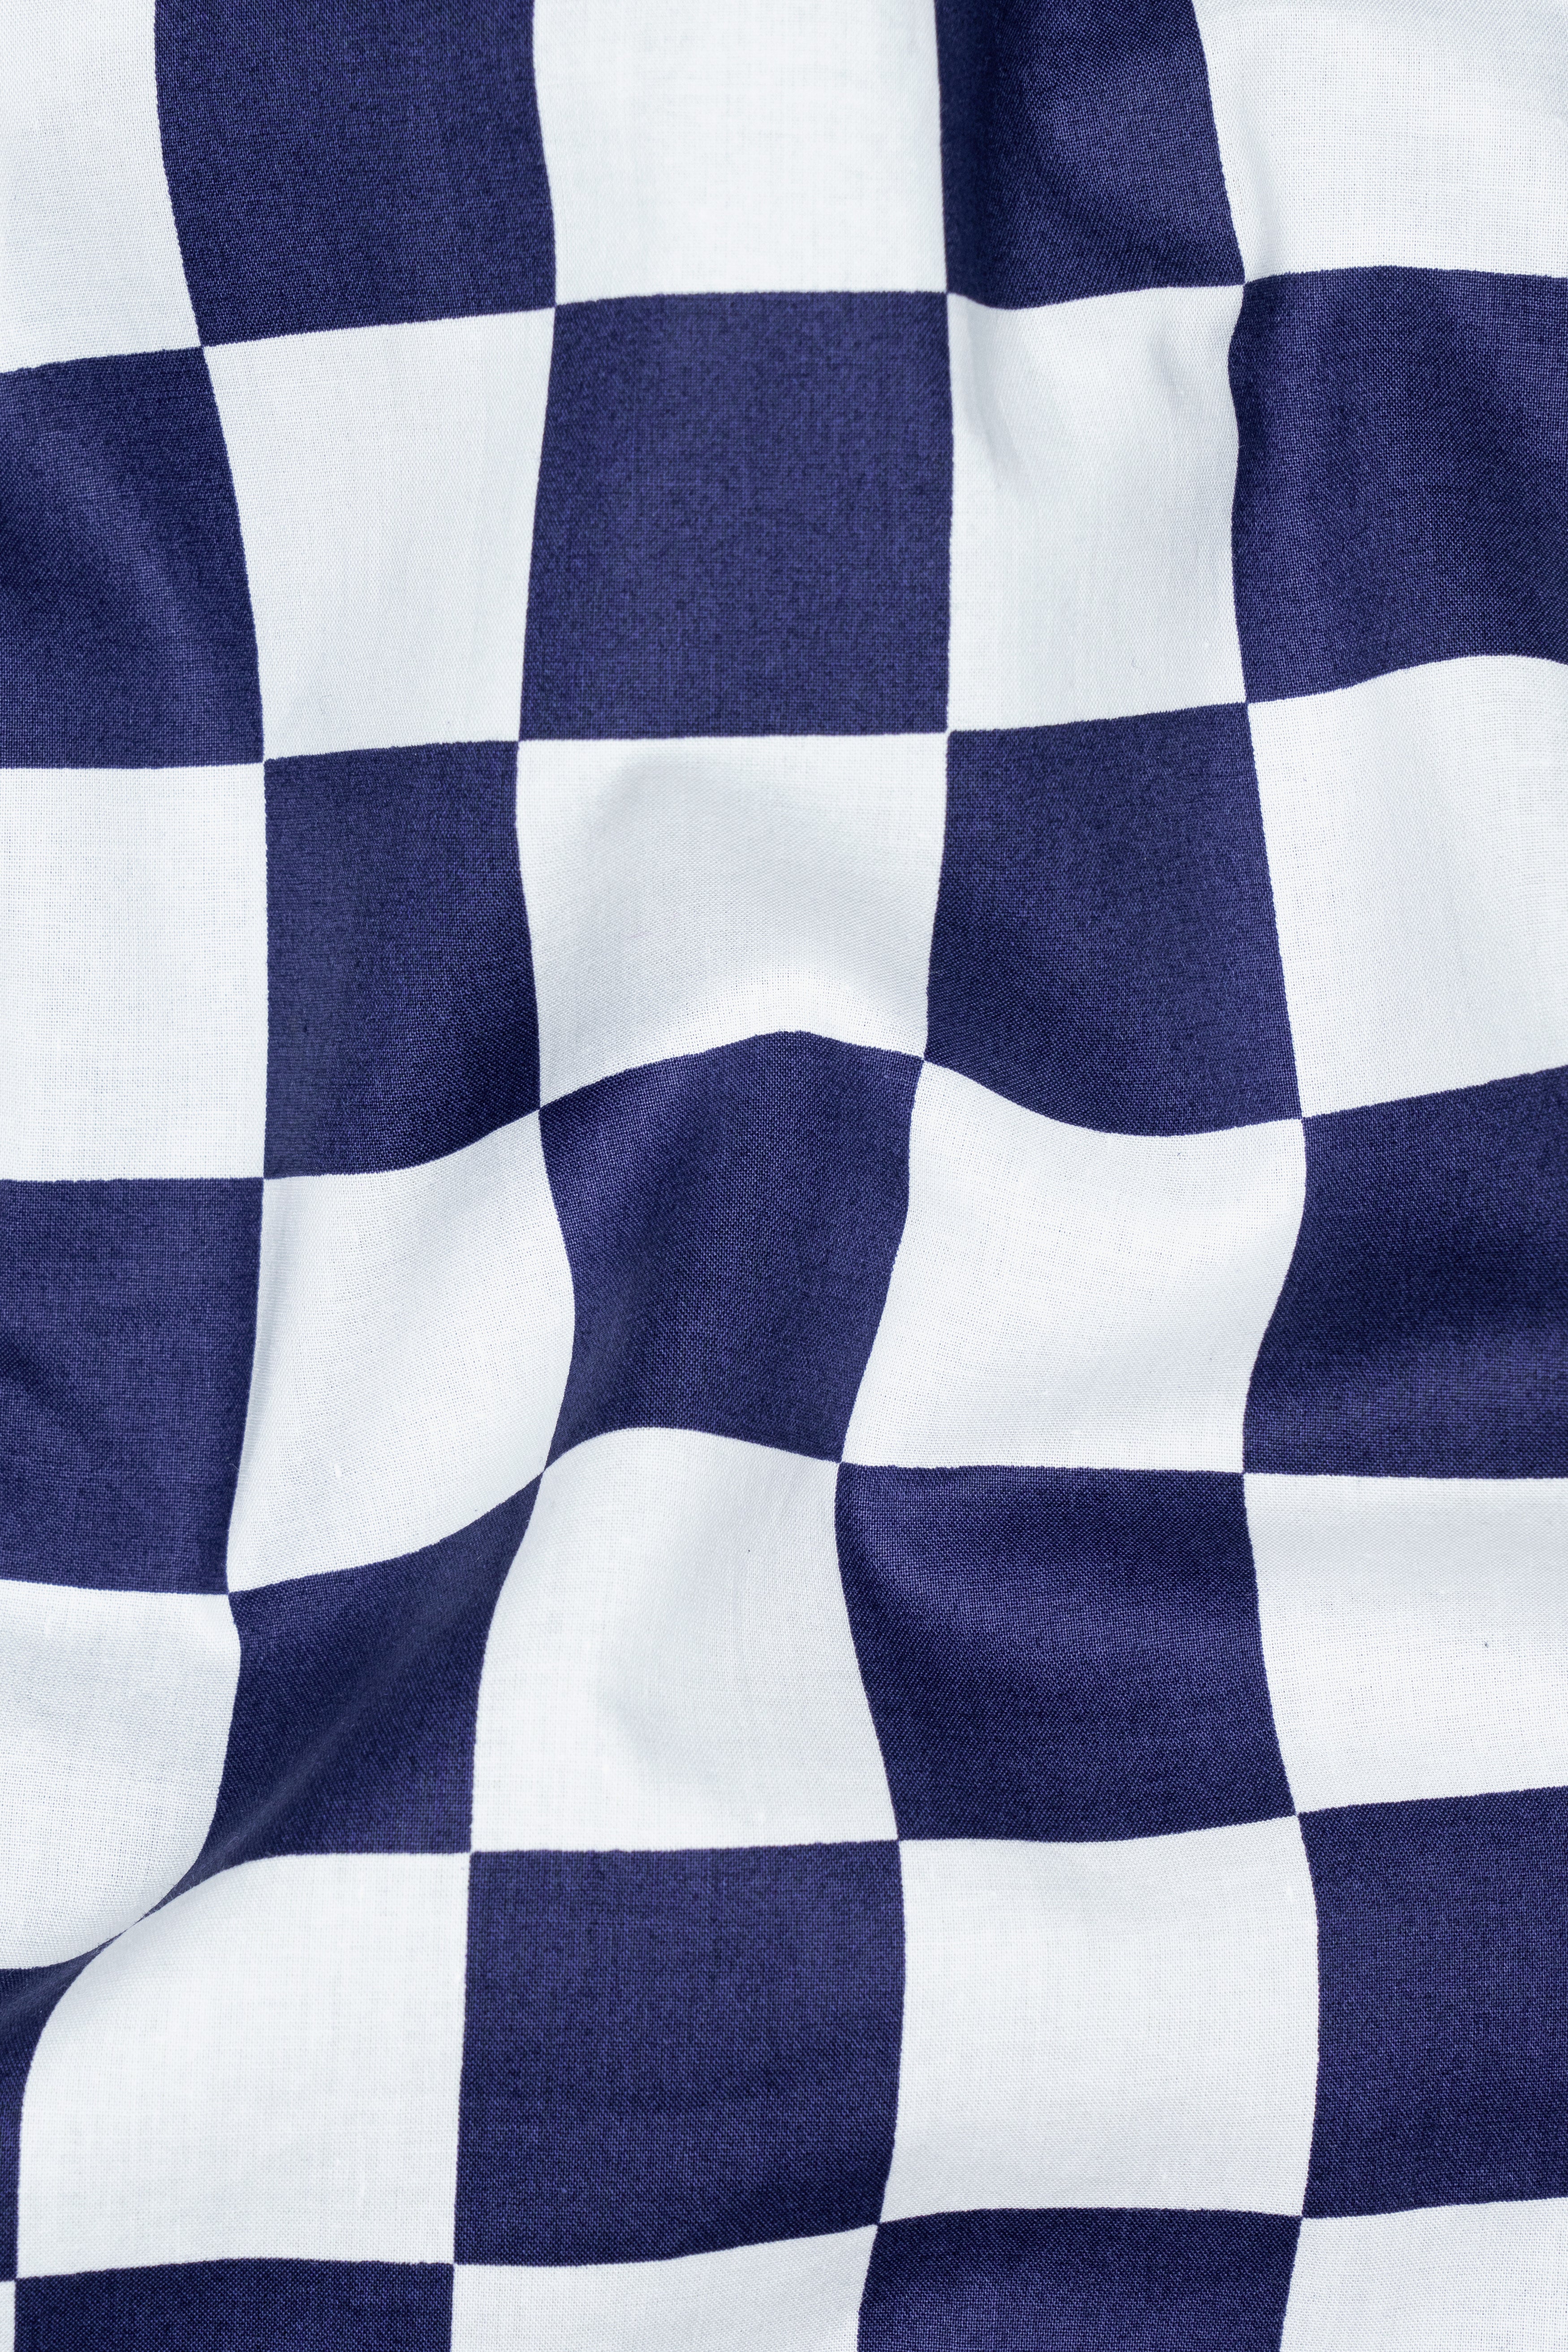 Bunting Blue with White Chess Board Printed Poplin Cotton Shirt